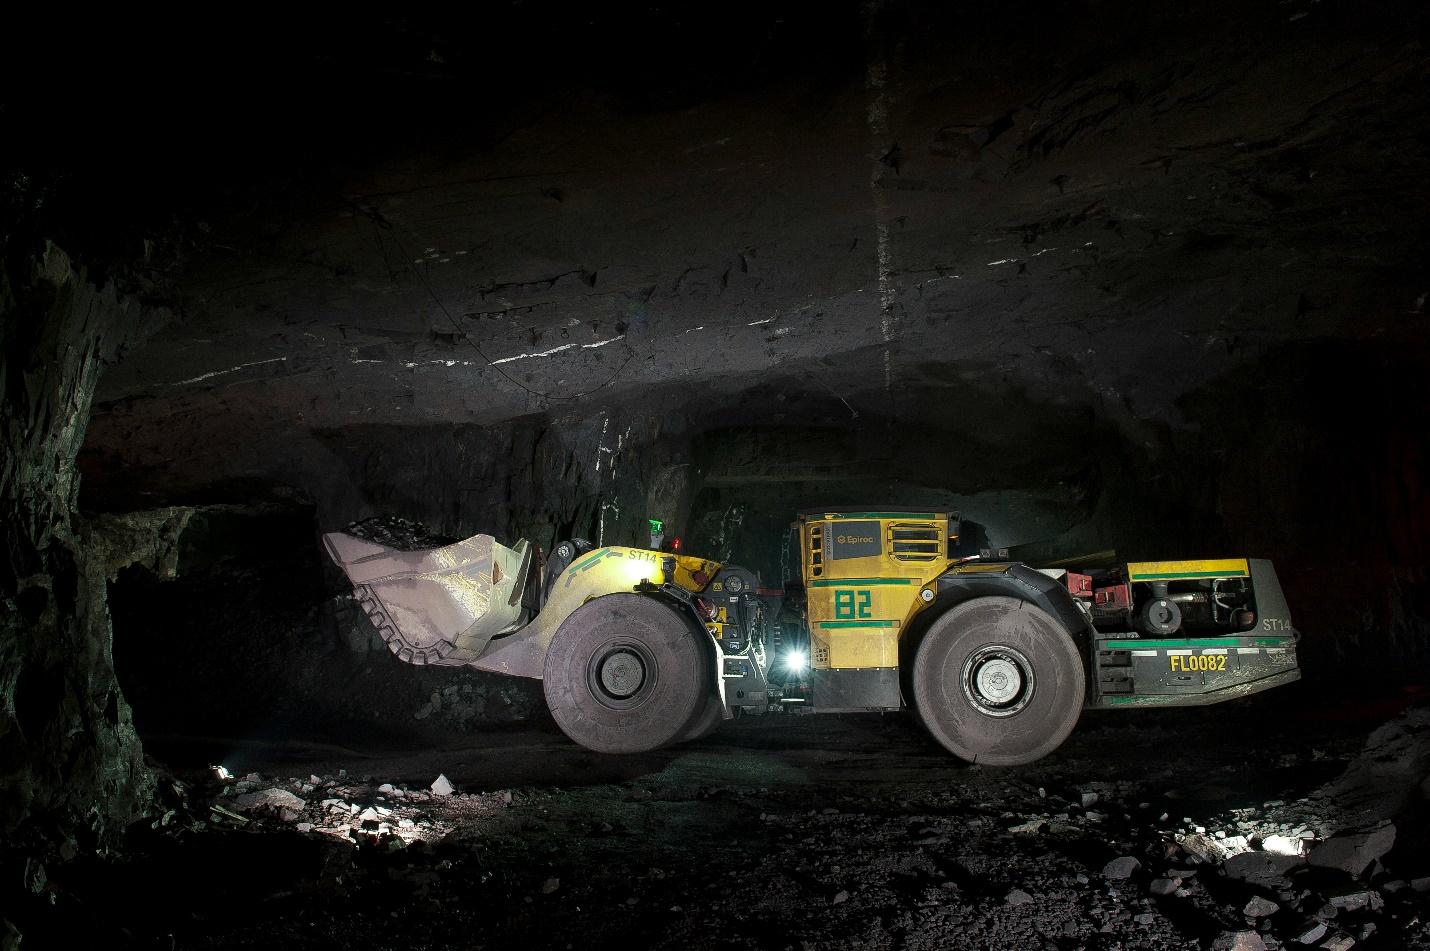 A large yellow and green vehicle in a dark cave

Description automatically generated